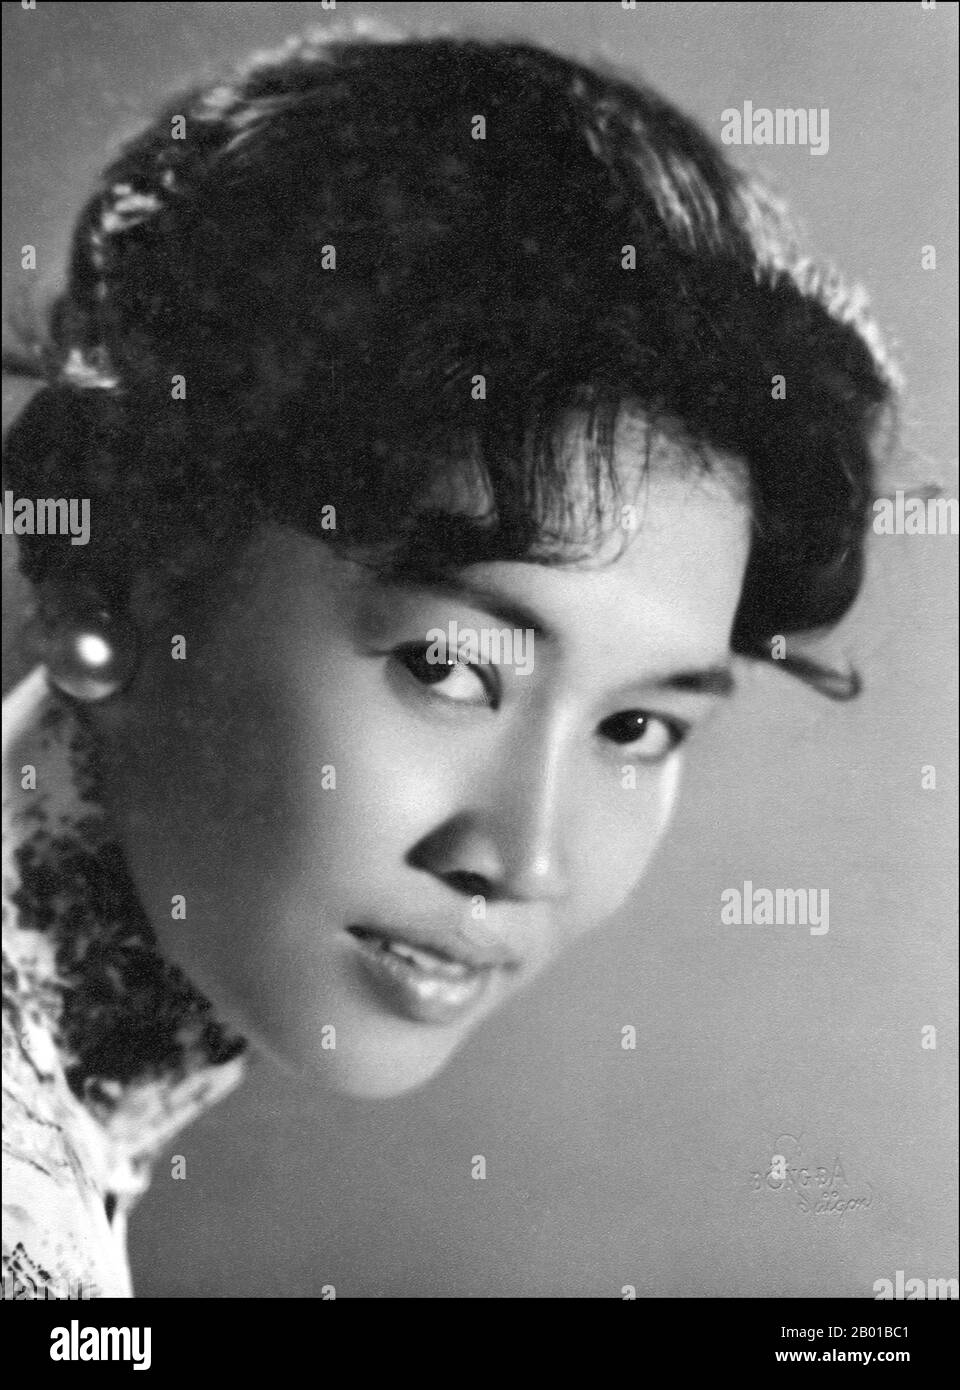 Vietnam: Portrait of a young Vietnamese woman in Saigon, c. 1960s.  Photograph of an attractive unknown young woman in Saigon in the 1960s wearing an ao dai and with a 1960s hairstyle. Stock Photo